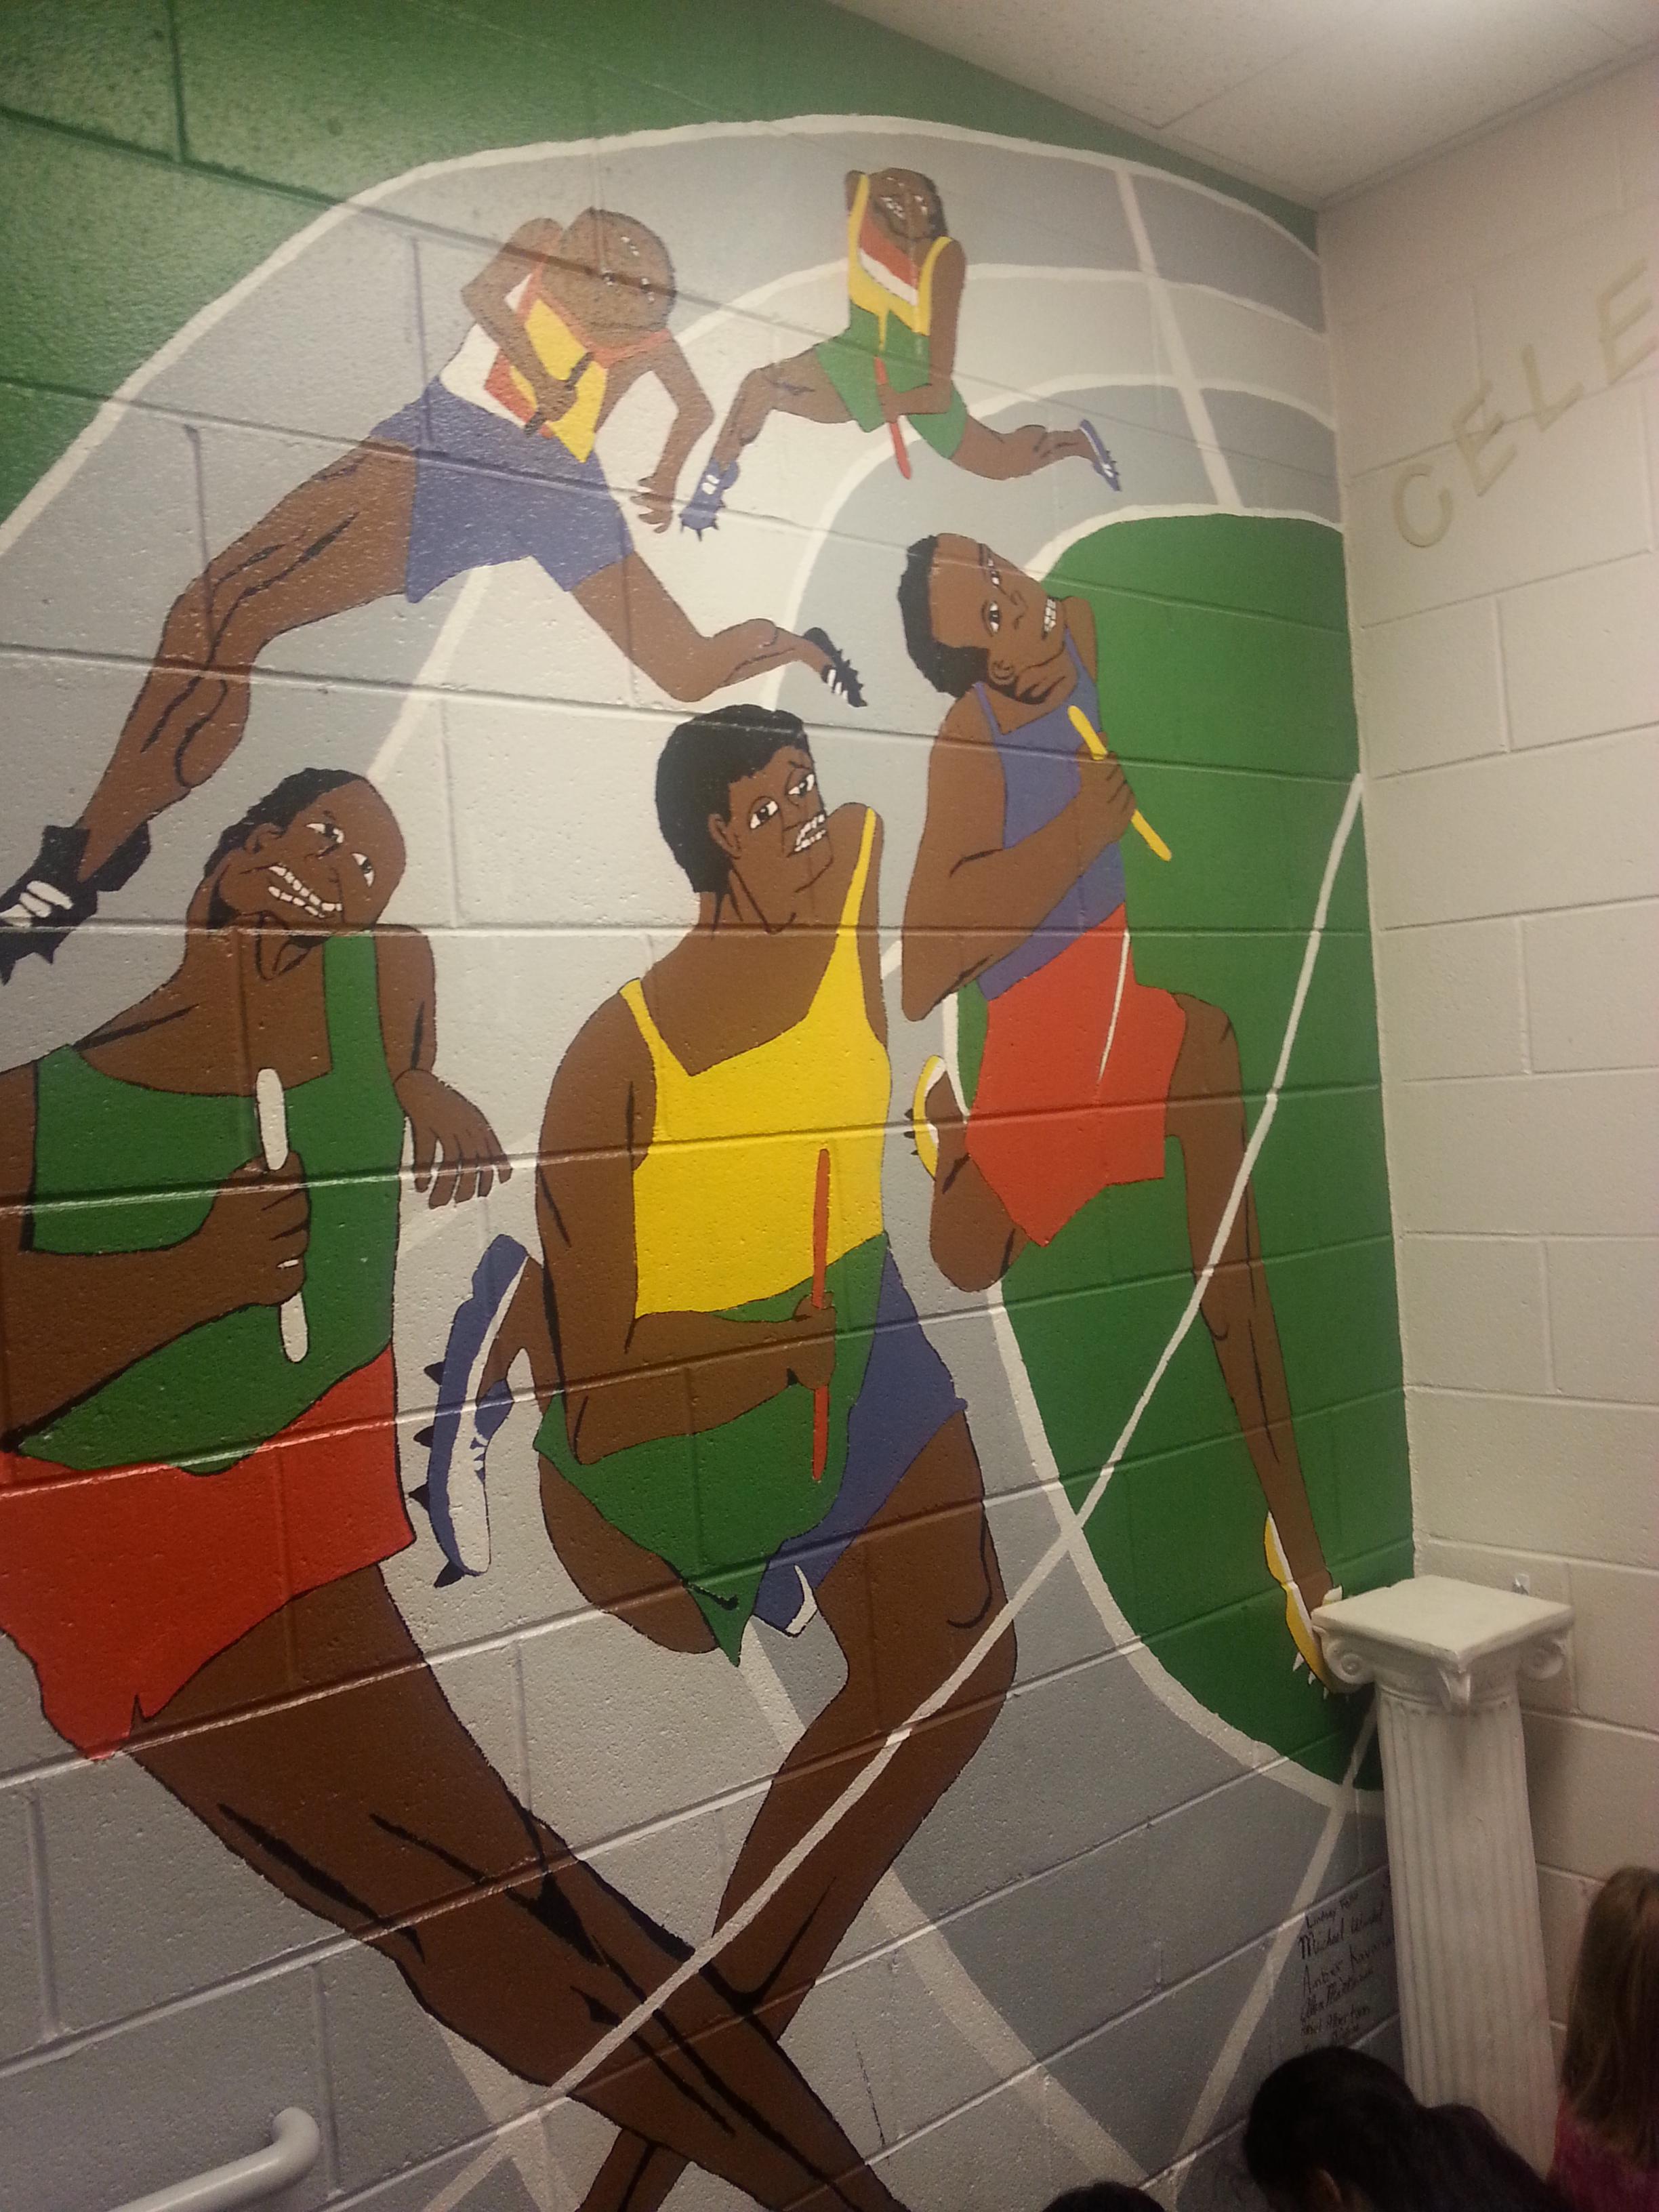 This disturbing mural is painted in the gym at this imgur guy's kids' elementary school.